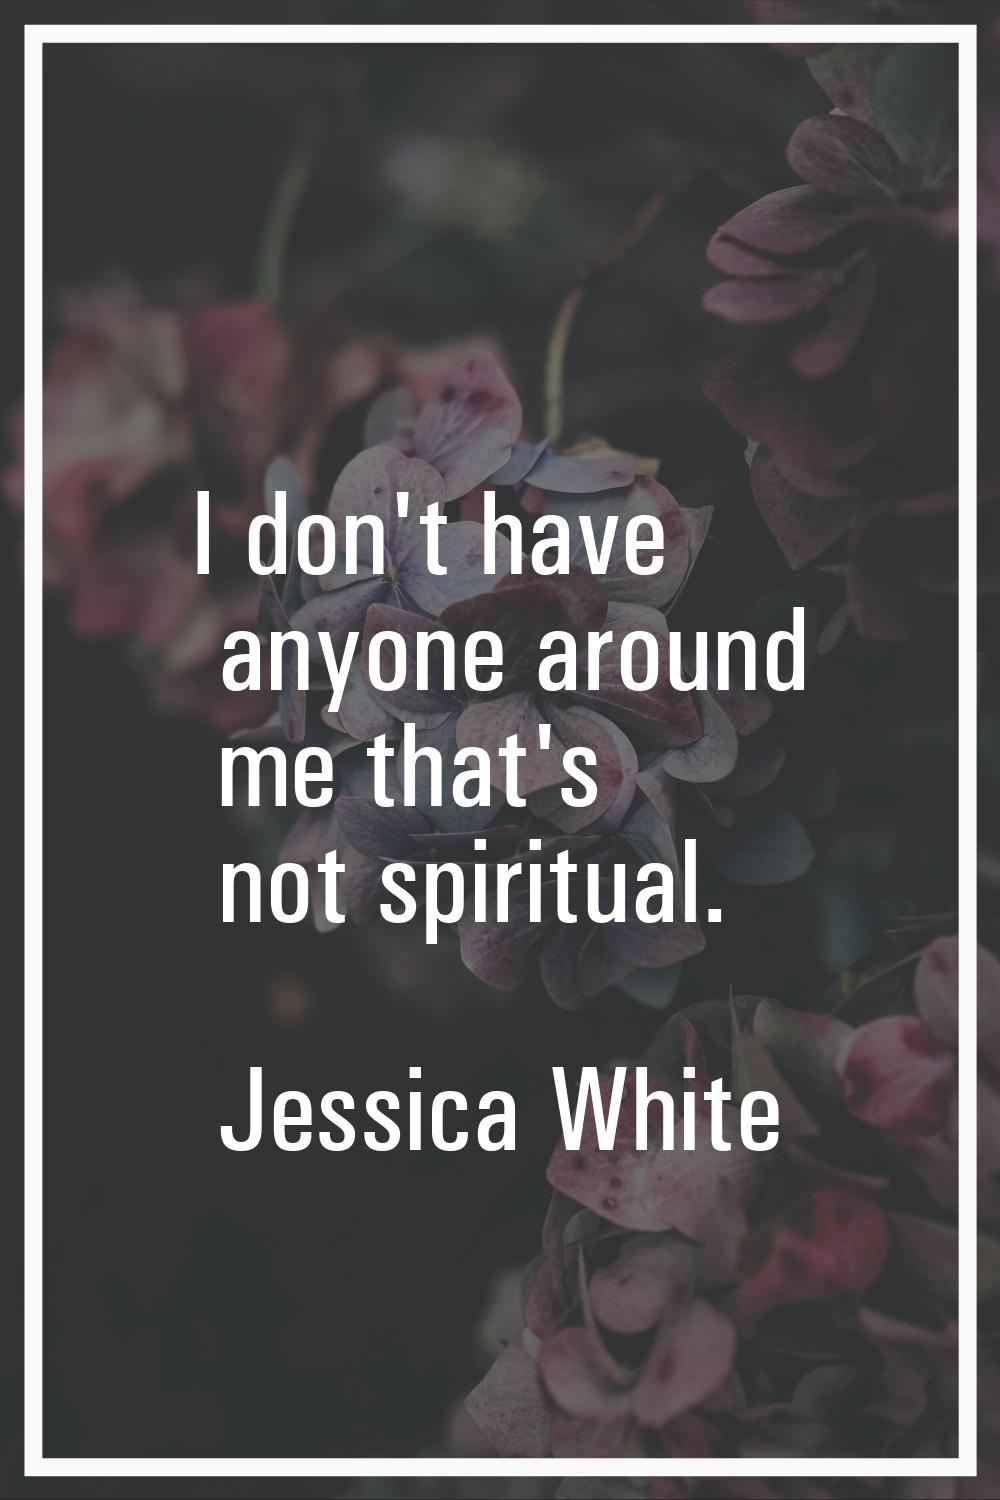 I don't have anyone around me that's not spiritual.